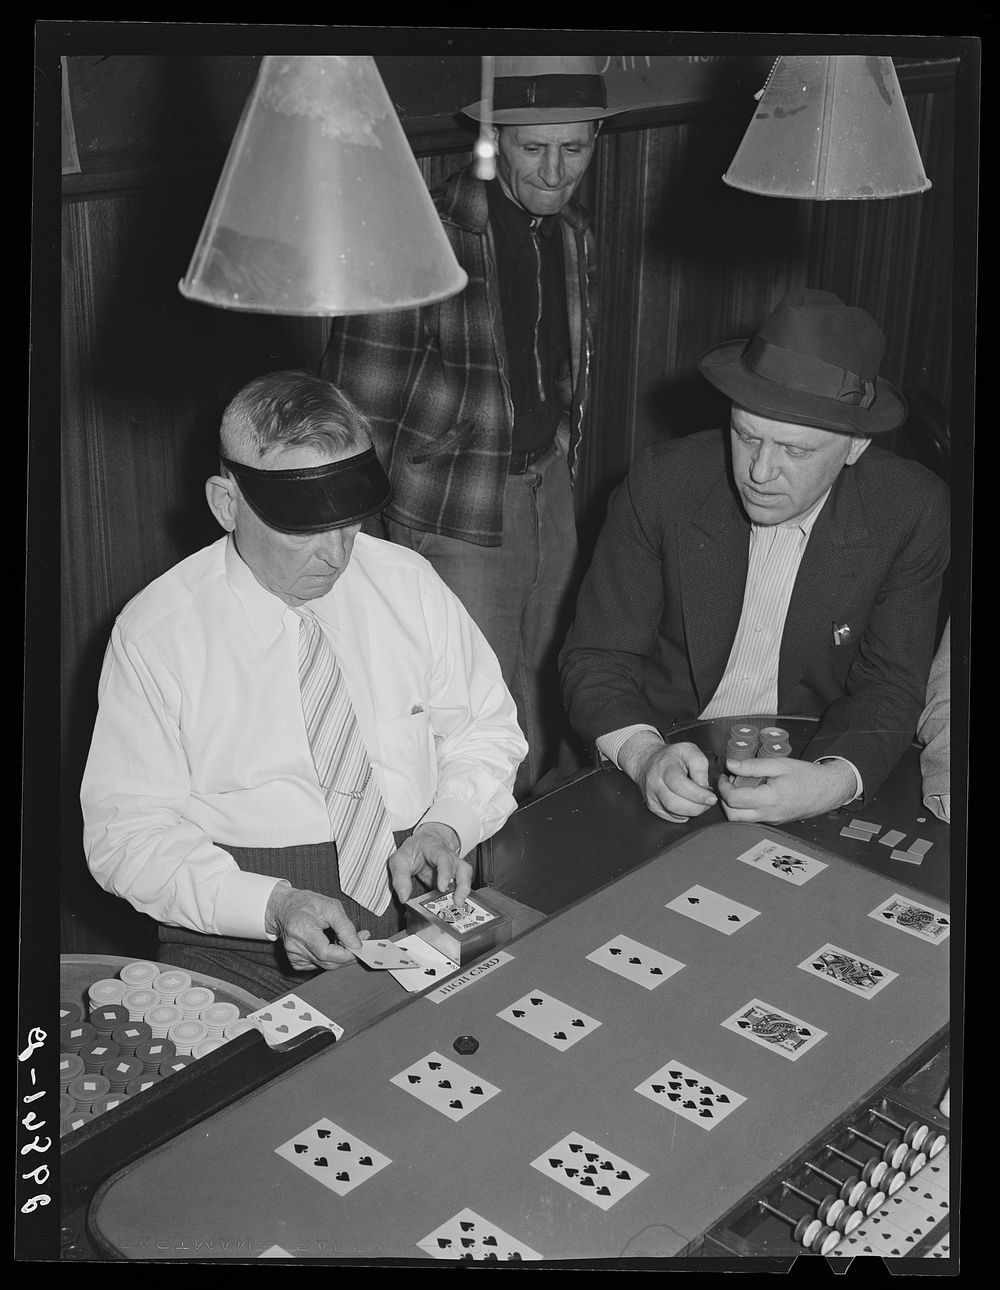 Dealing faro. Las Vegas, Nevada. Sourced from the Library of Congress.